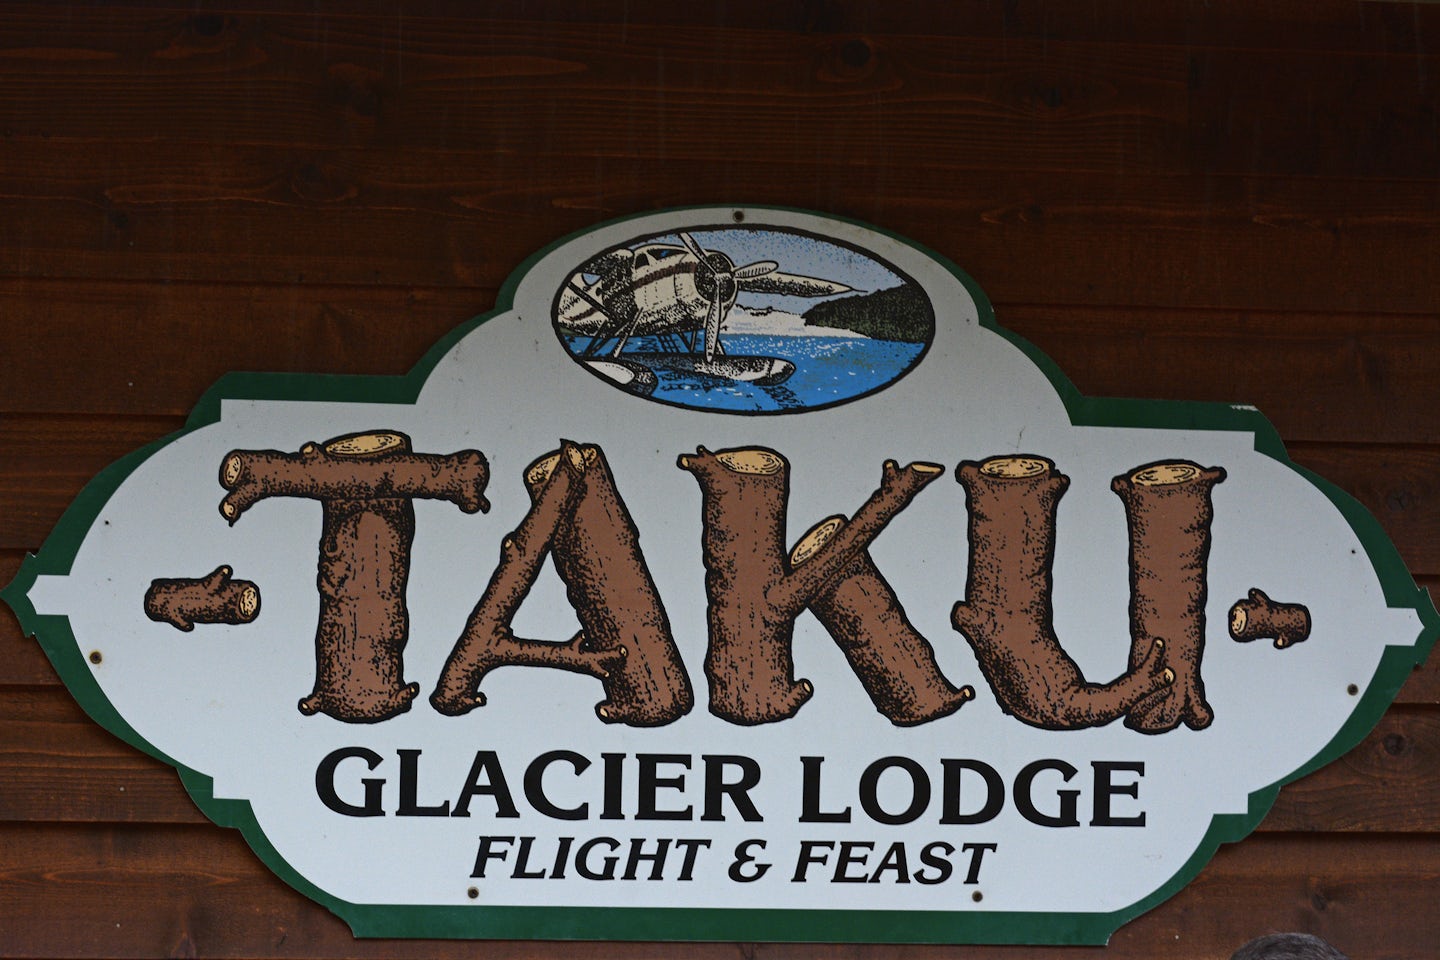 Juneau, flight & lunch at the Lodge